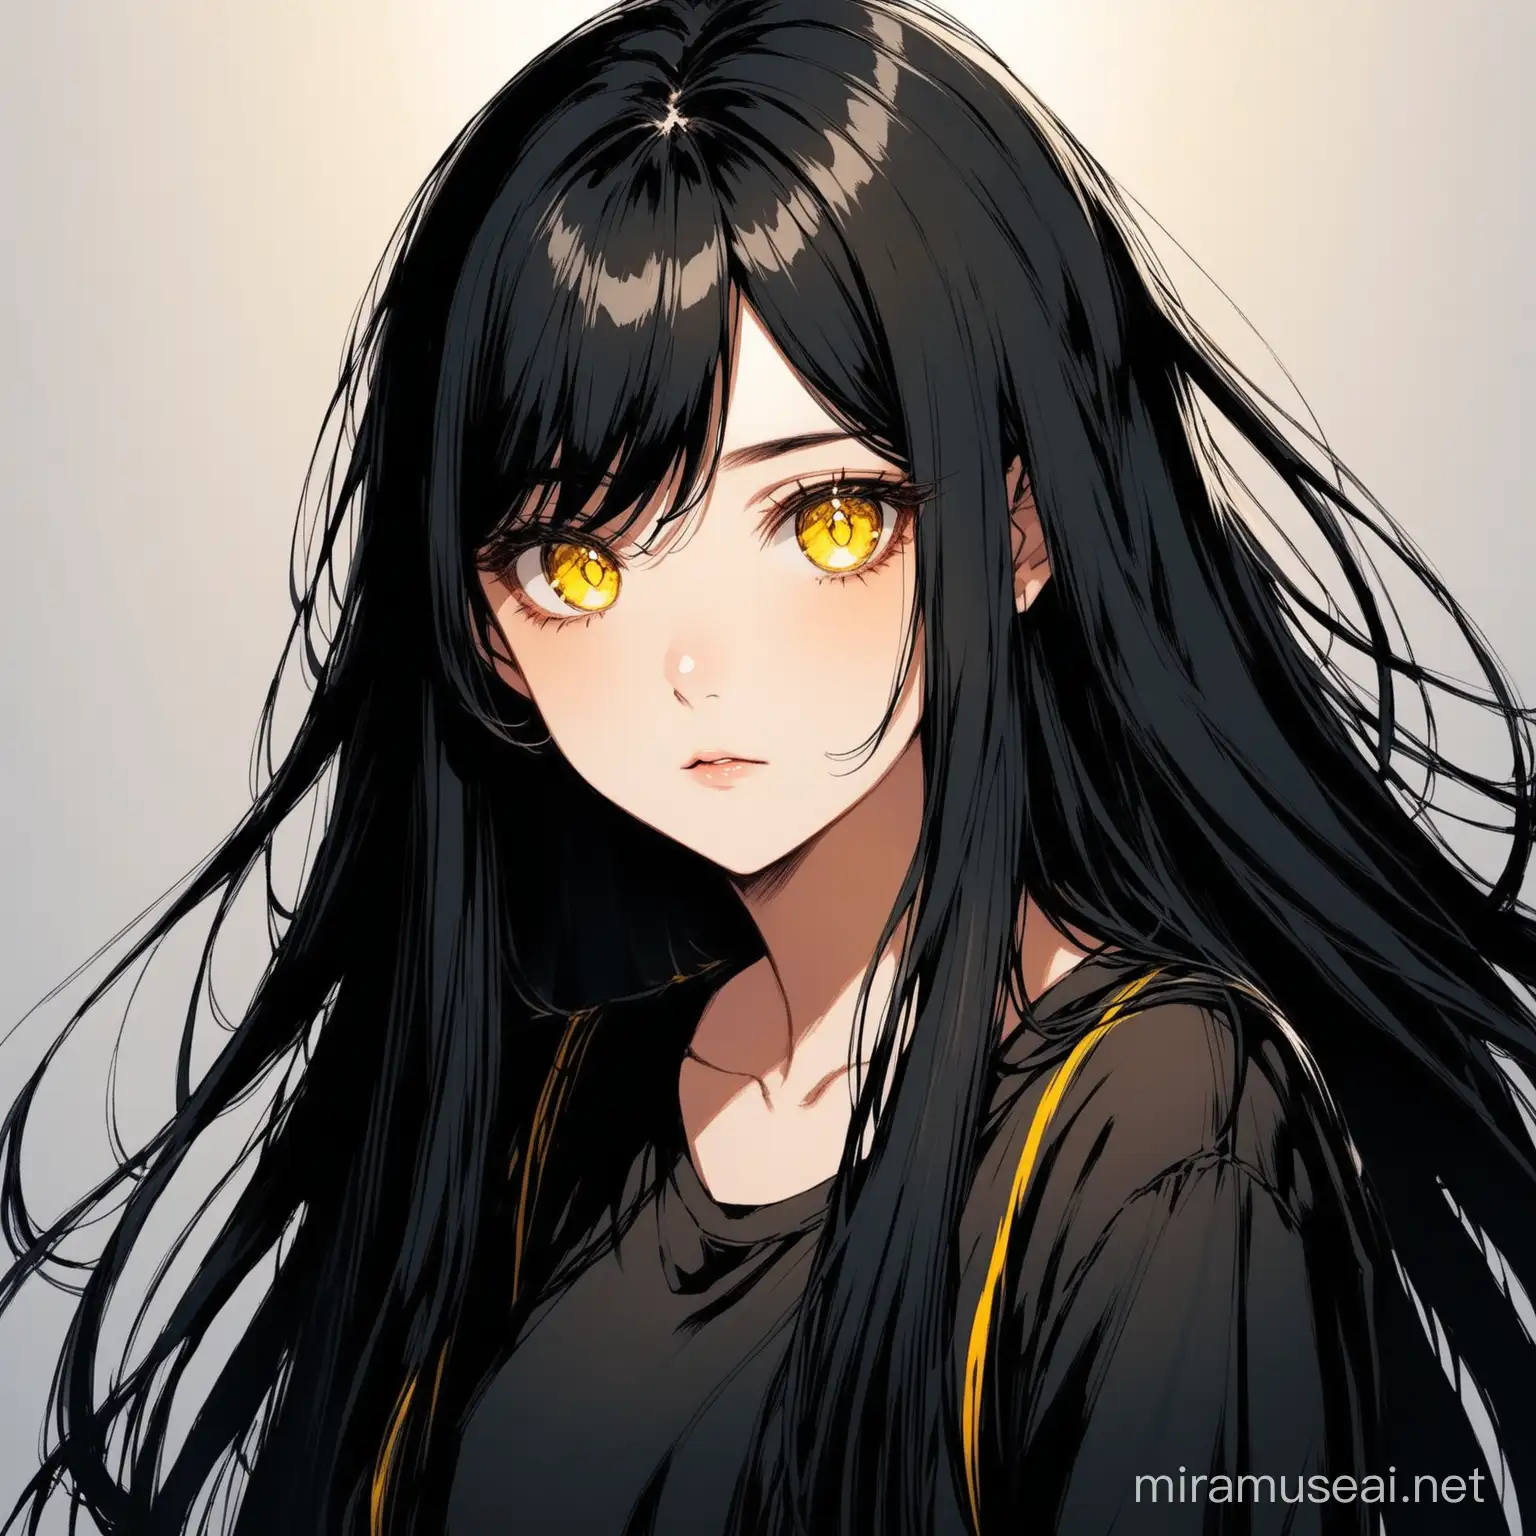 Enigmatic Girl with Yellow Eyes and Long Black Hair